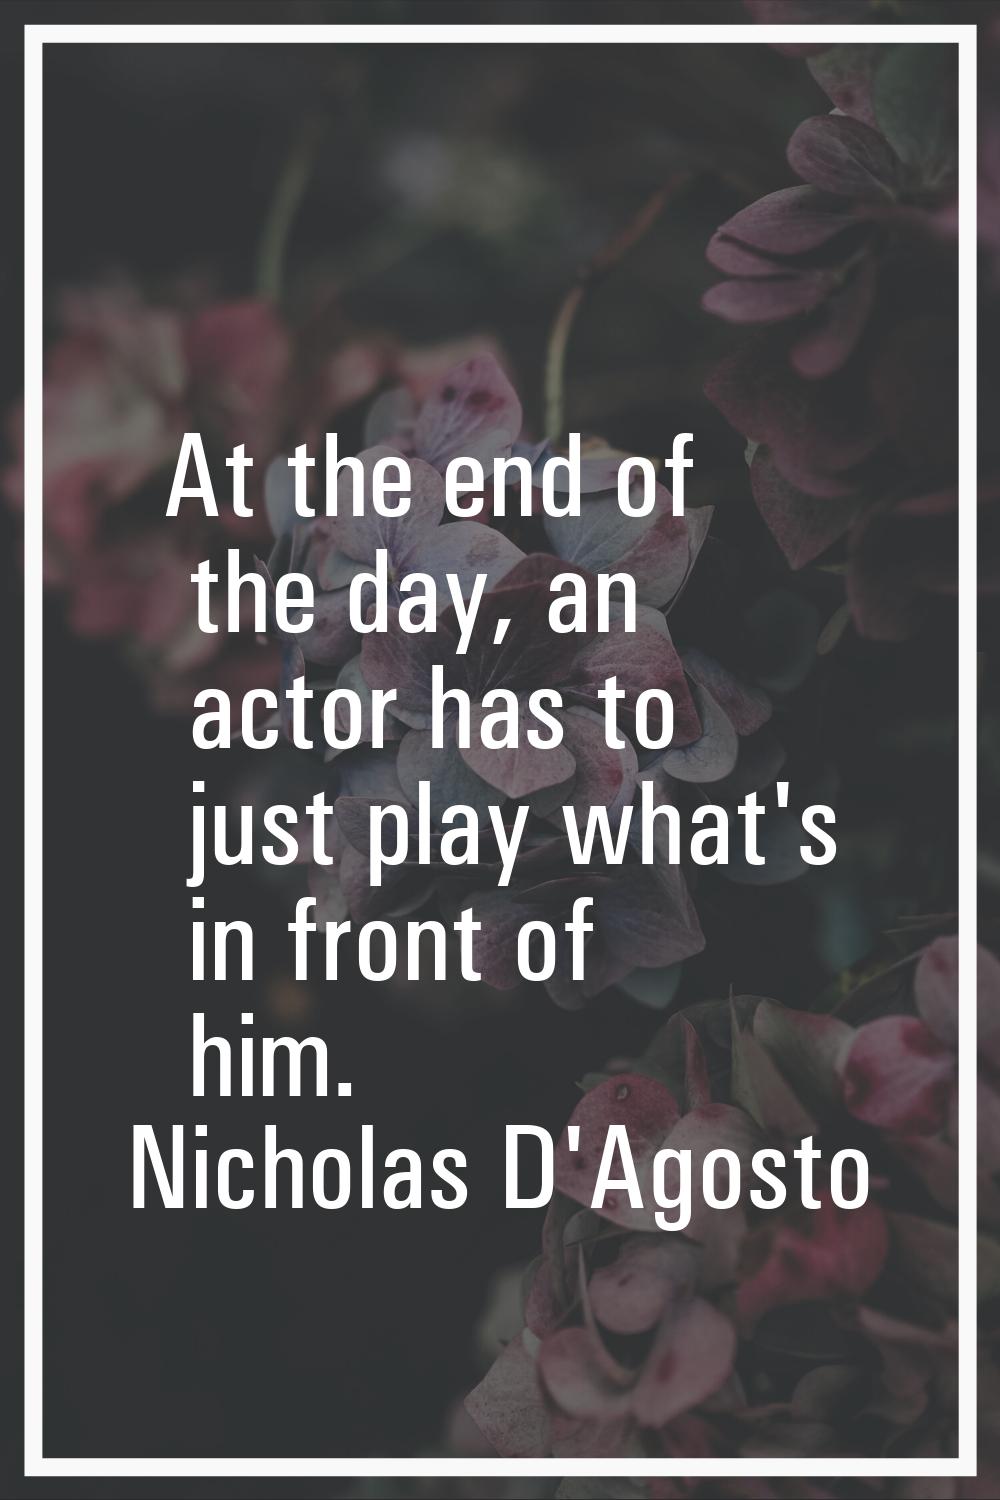 At the end of the day, an actor has to just play what's in front of him.